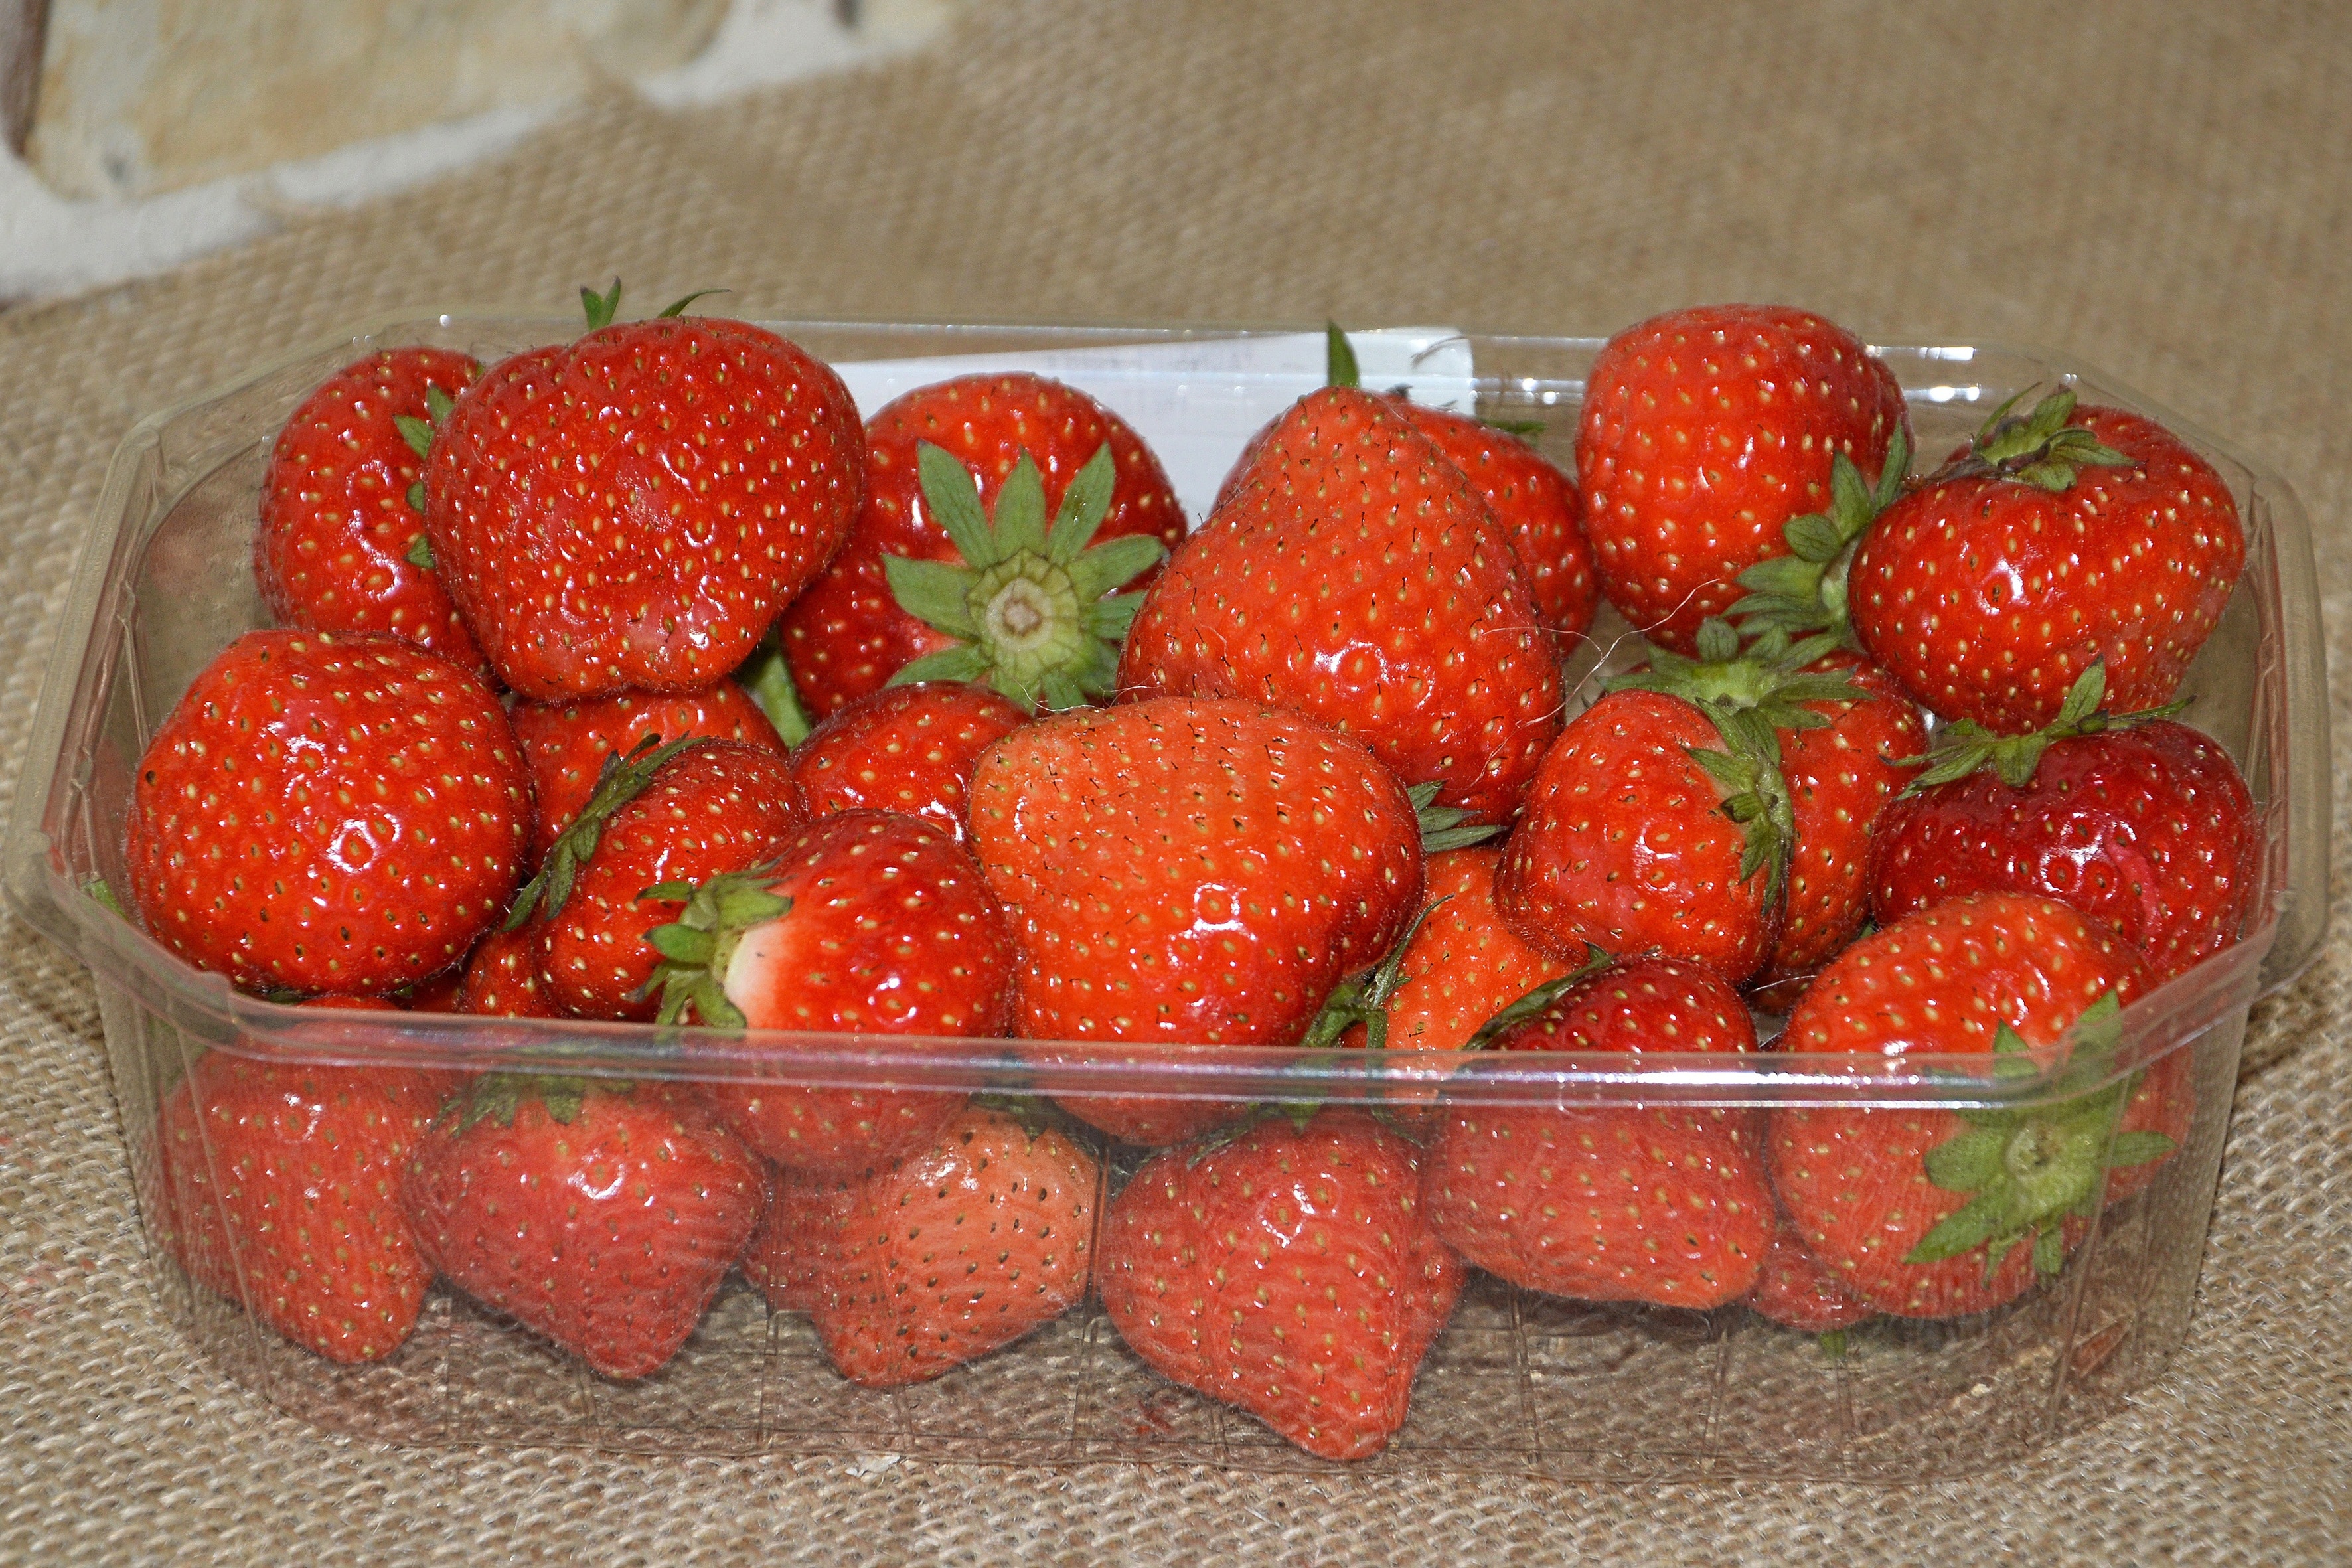 red strawberries in clear glass container